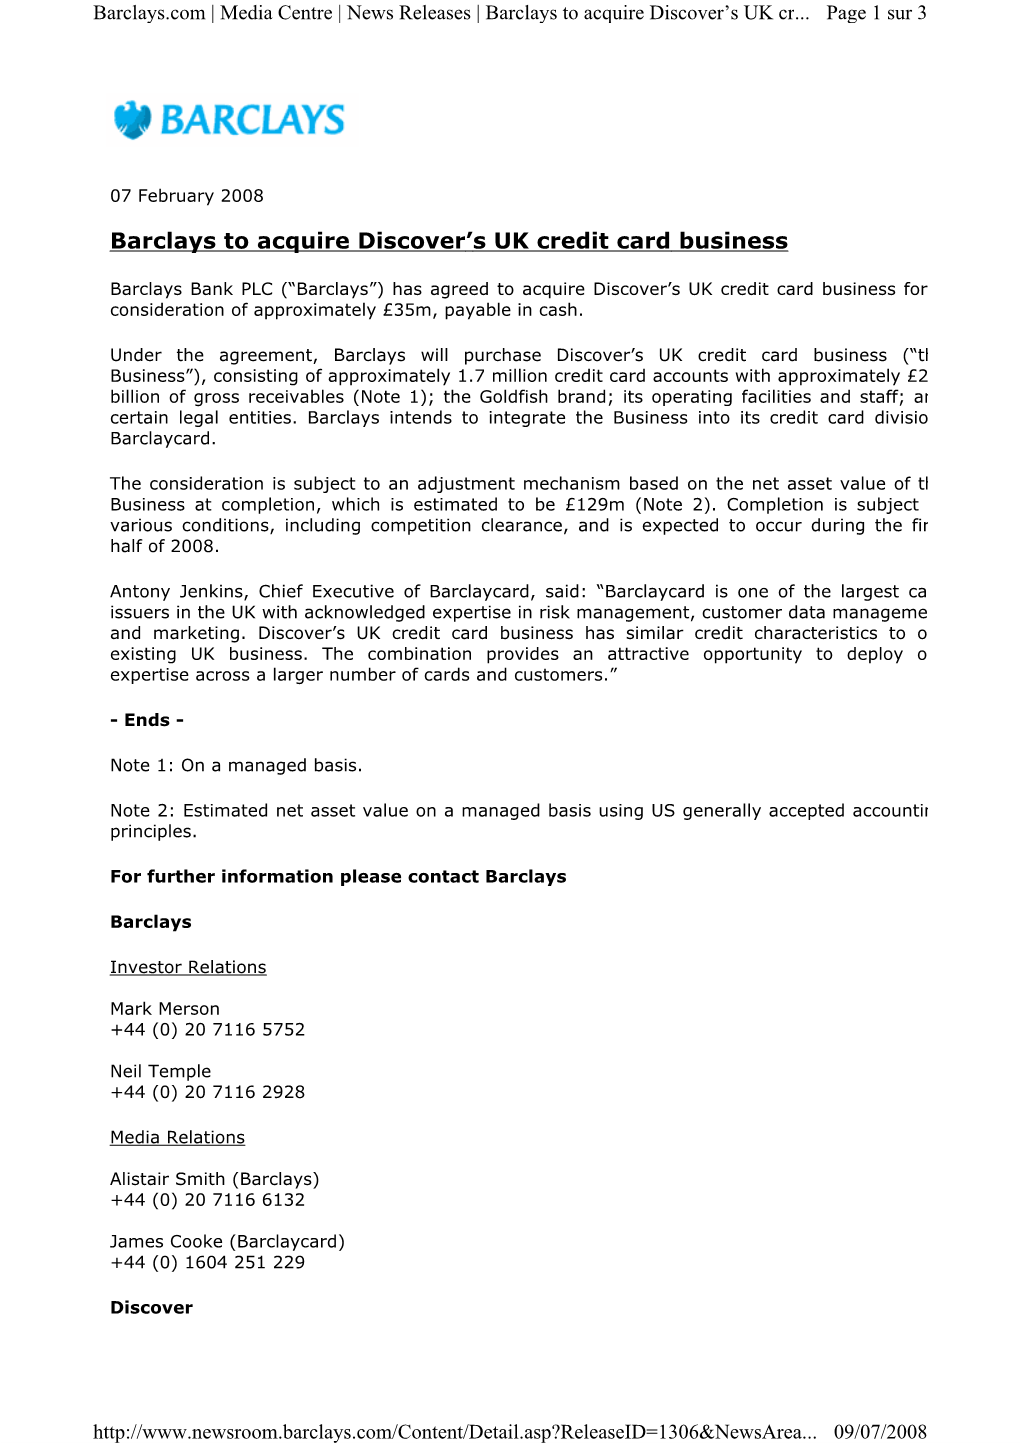 Barclays to Acquire Discover's UK Credit Card Business